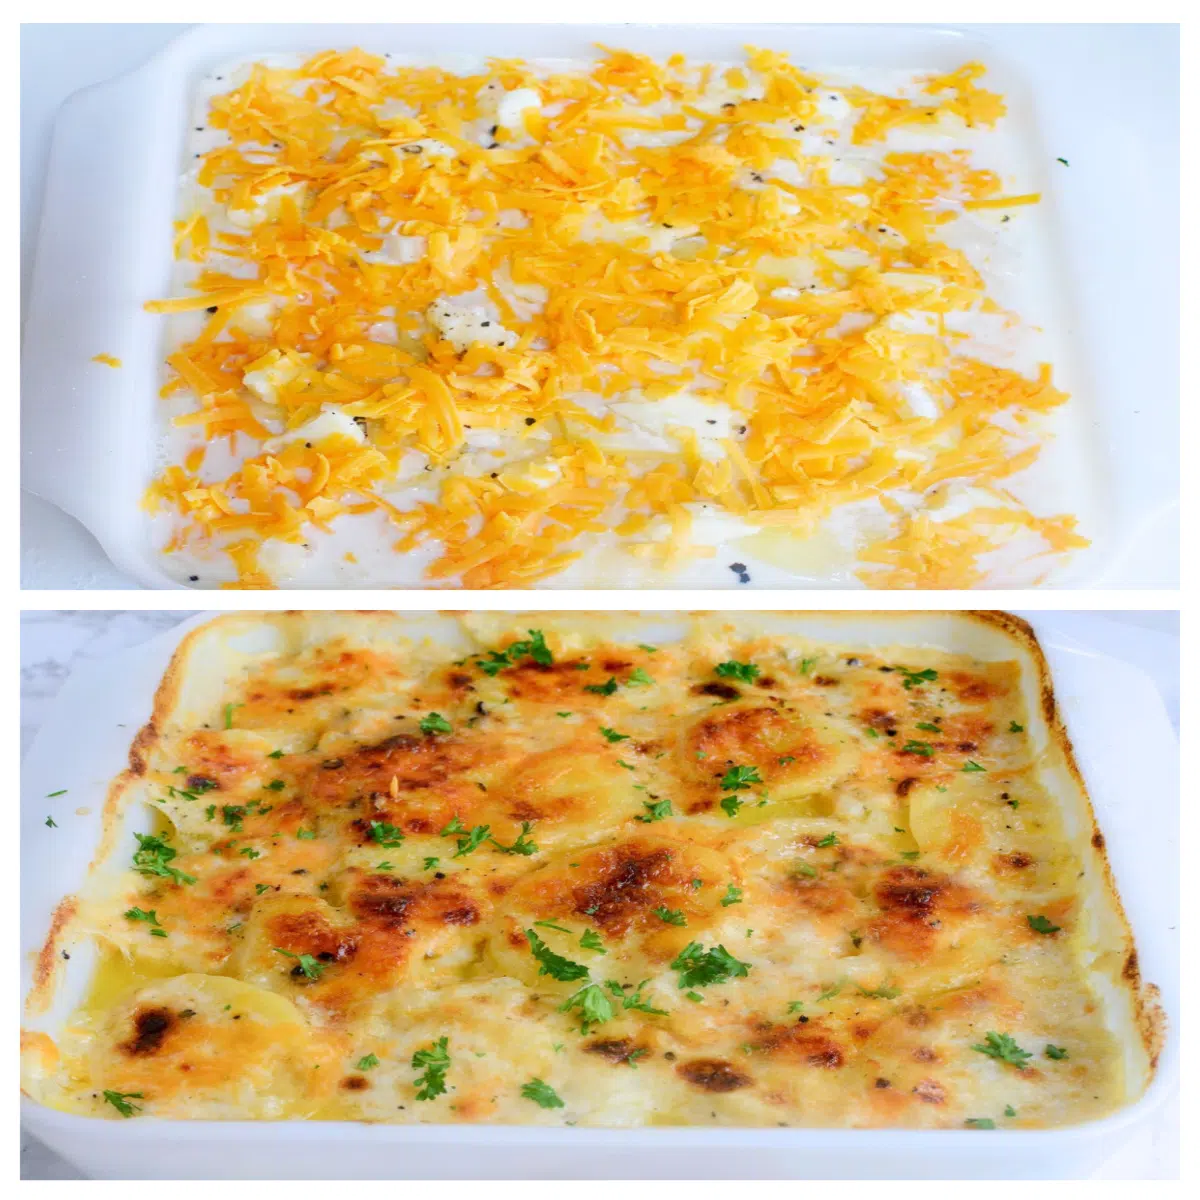 shredded cheese over potato casserole and baked casserole